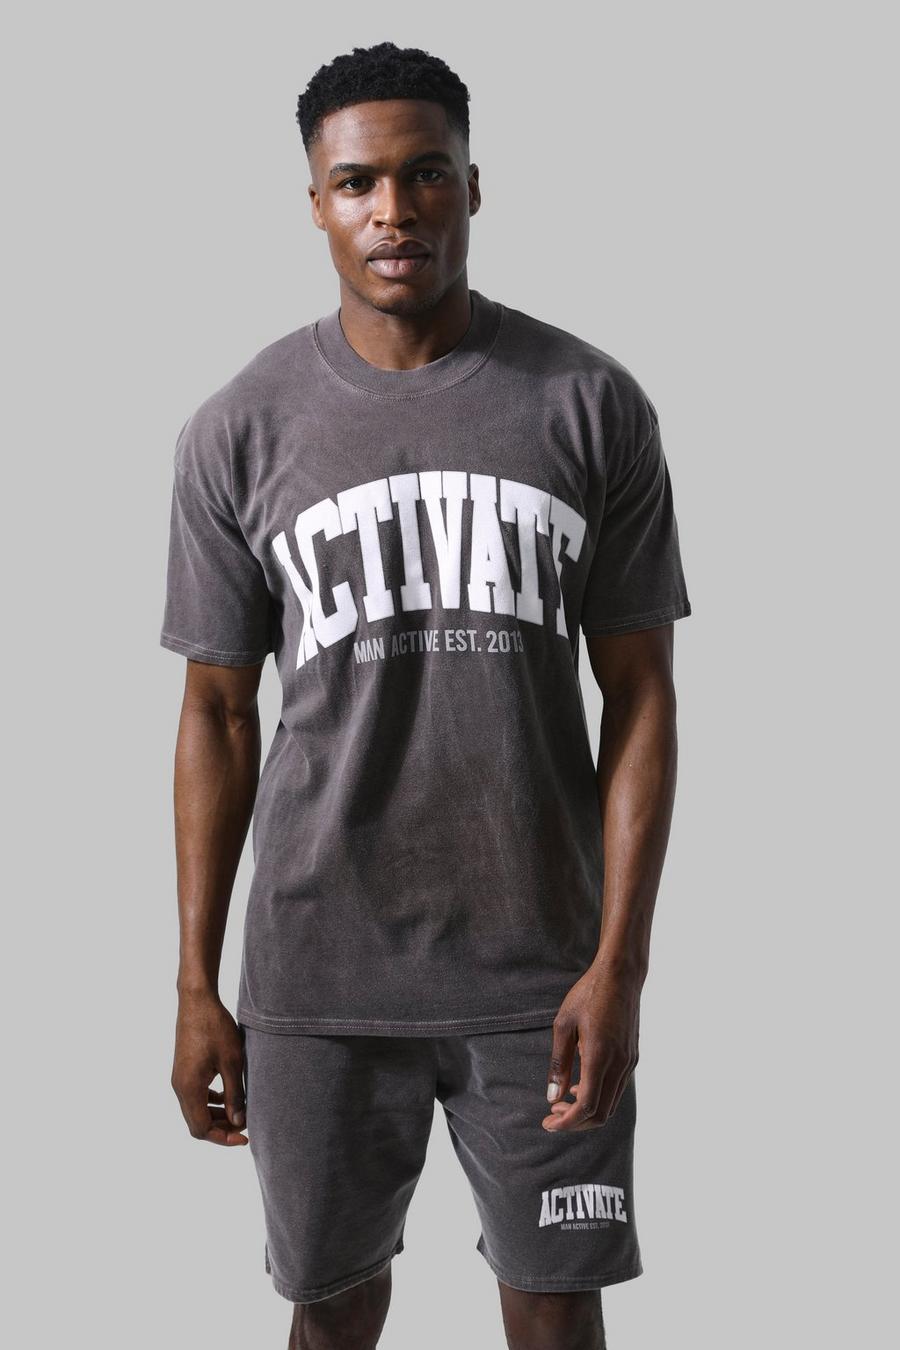 Man Active Activate T-Shirt, Chocolate